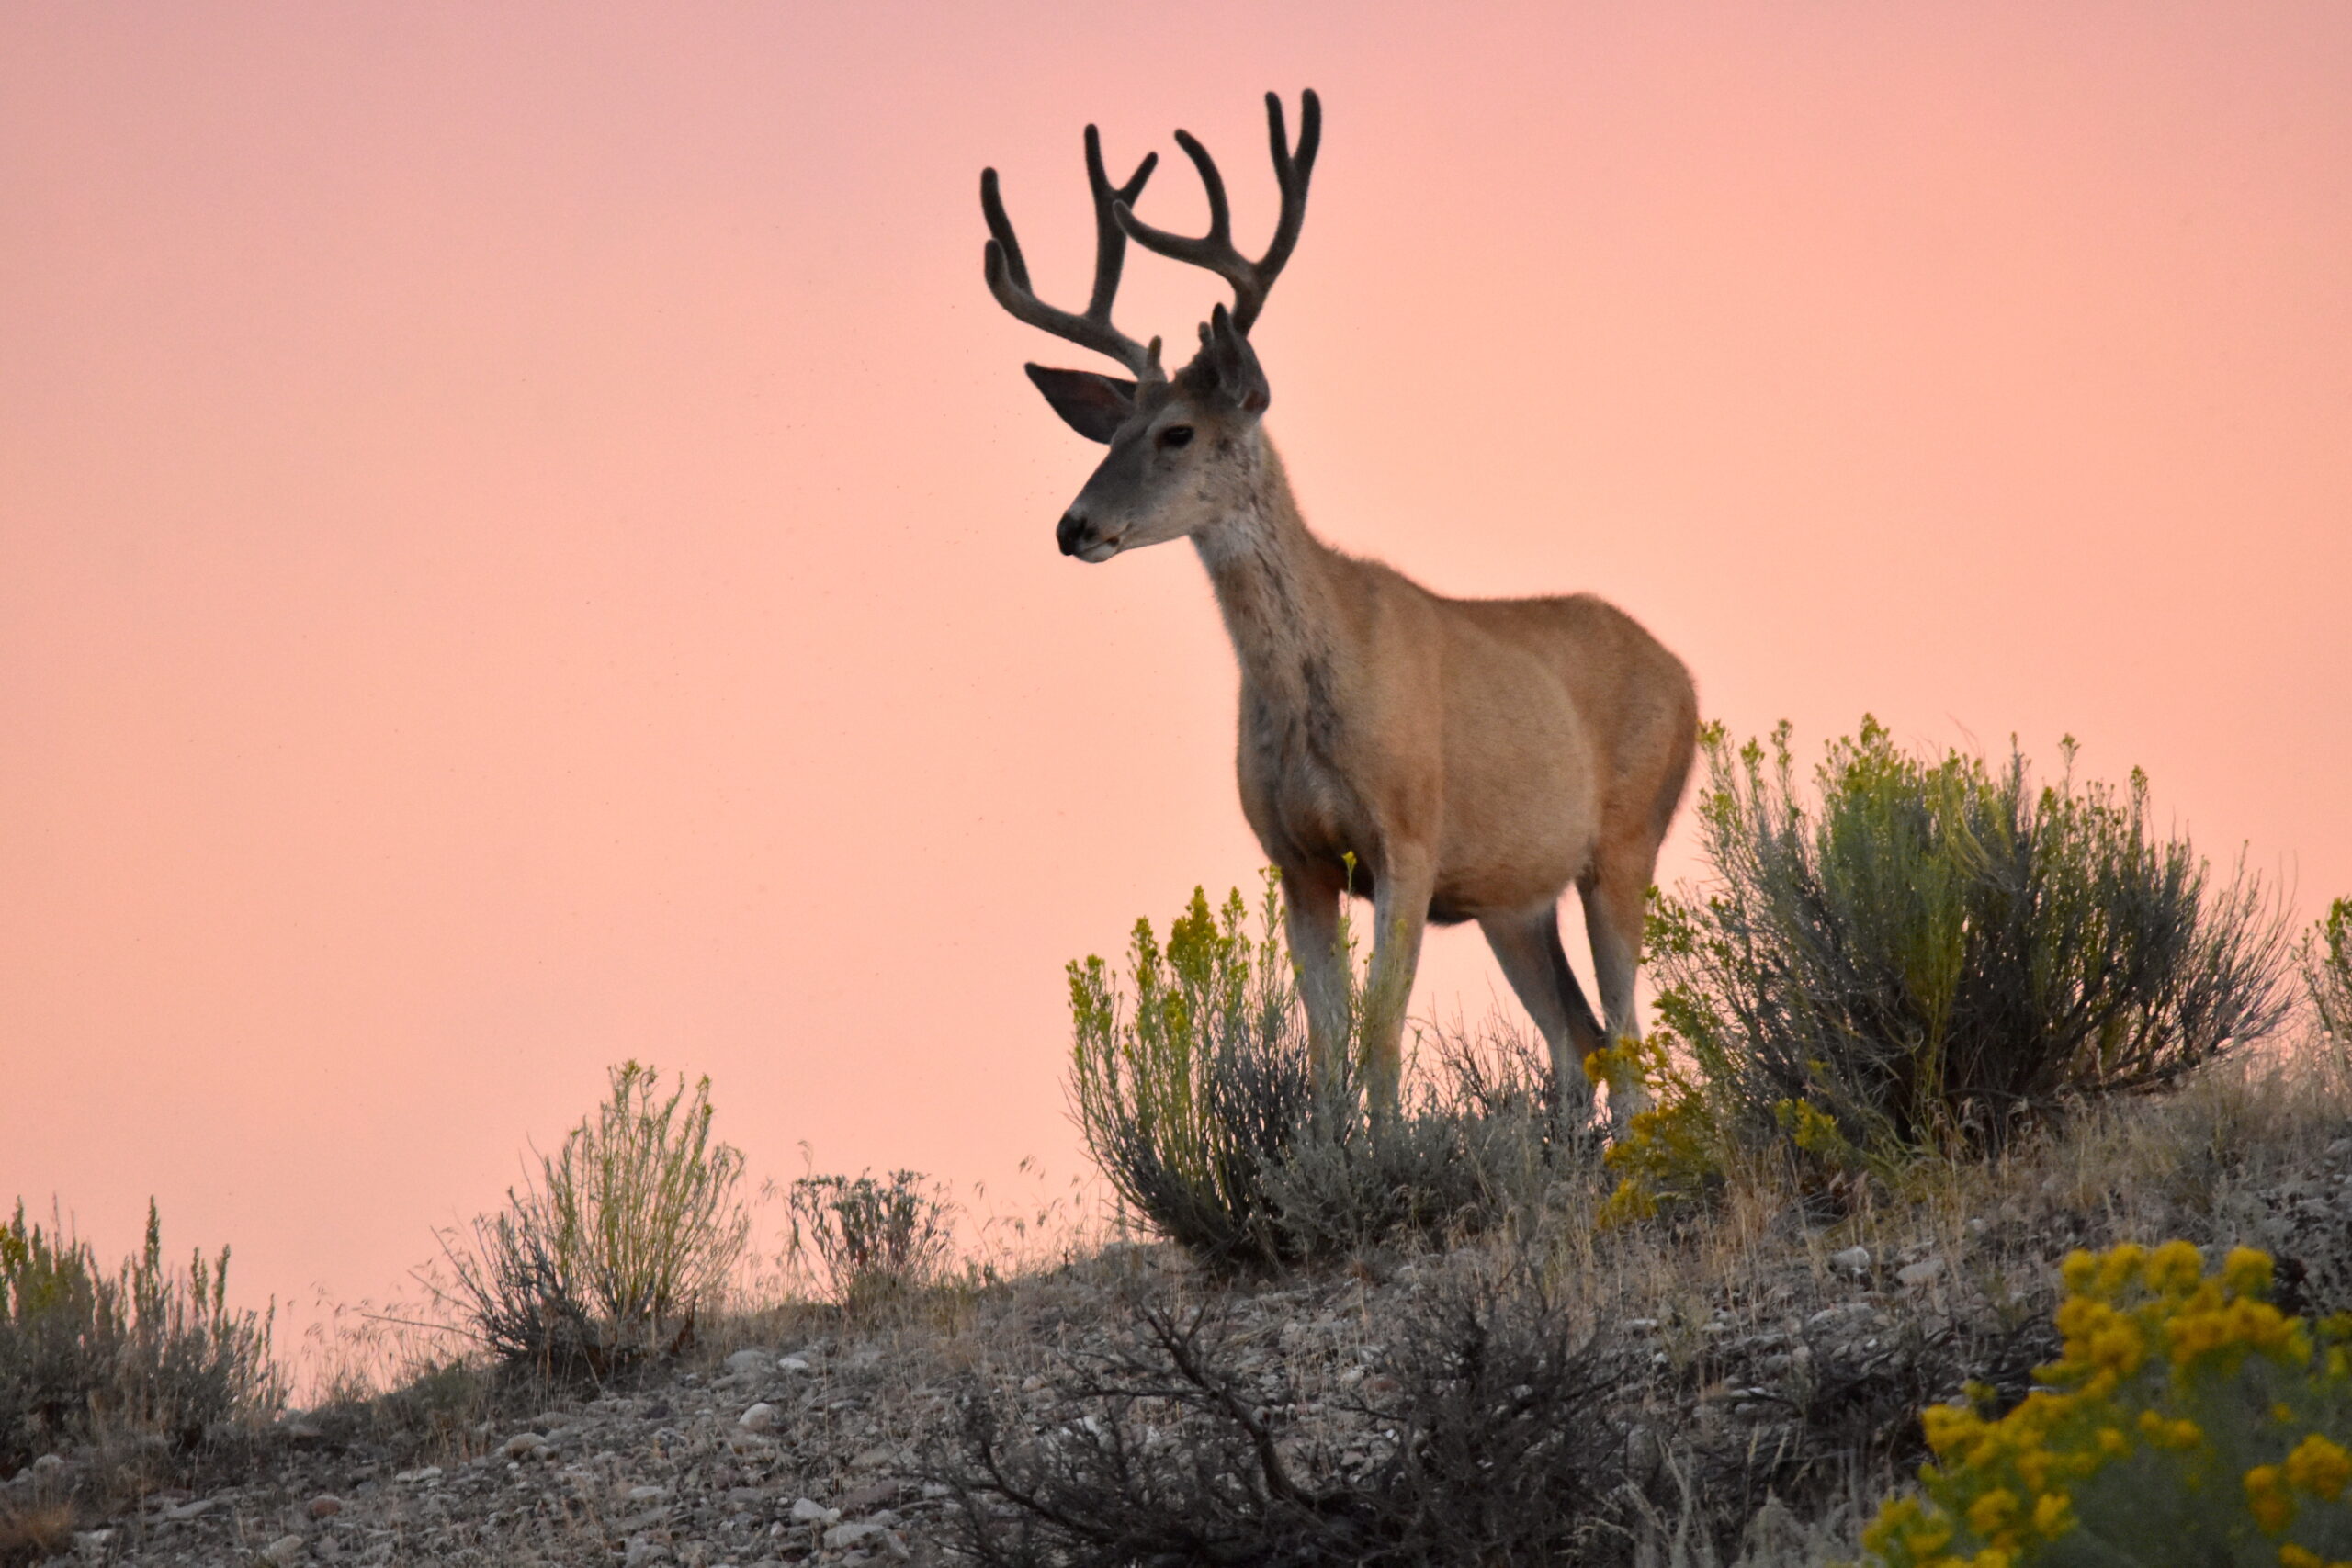 Drought conditions can take a toll on mule deer.